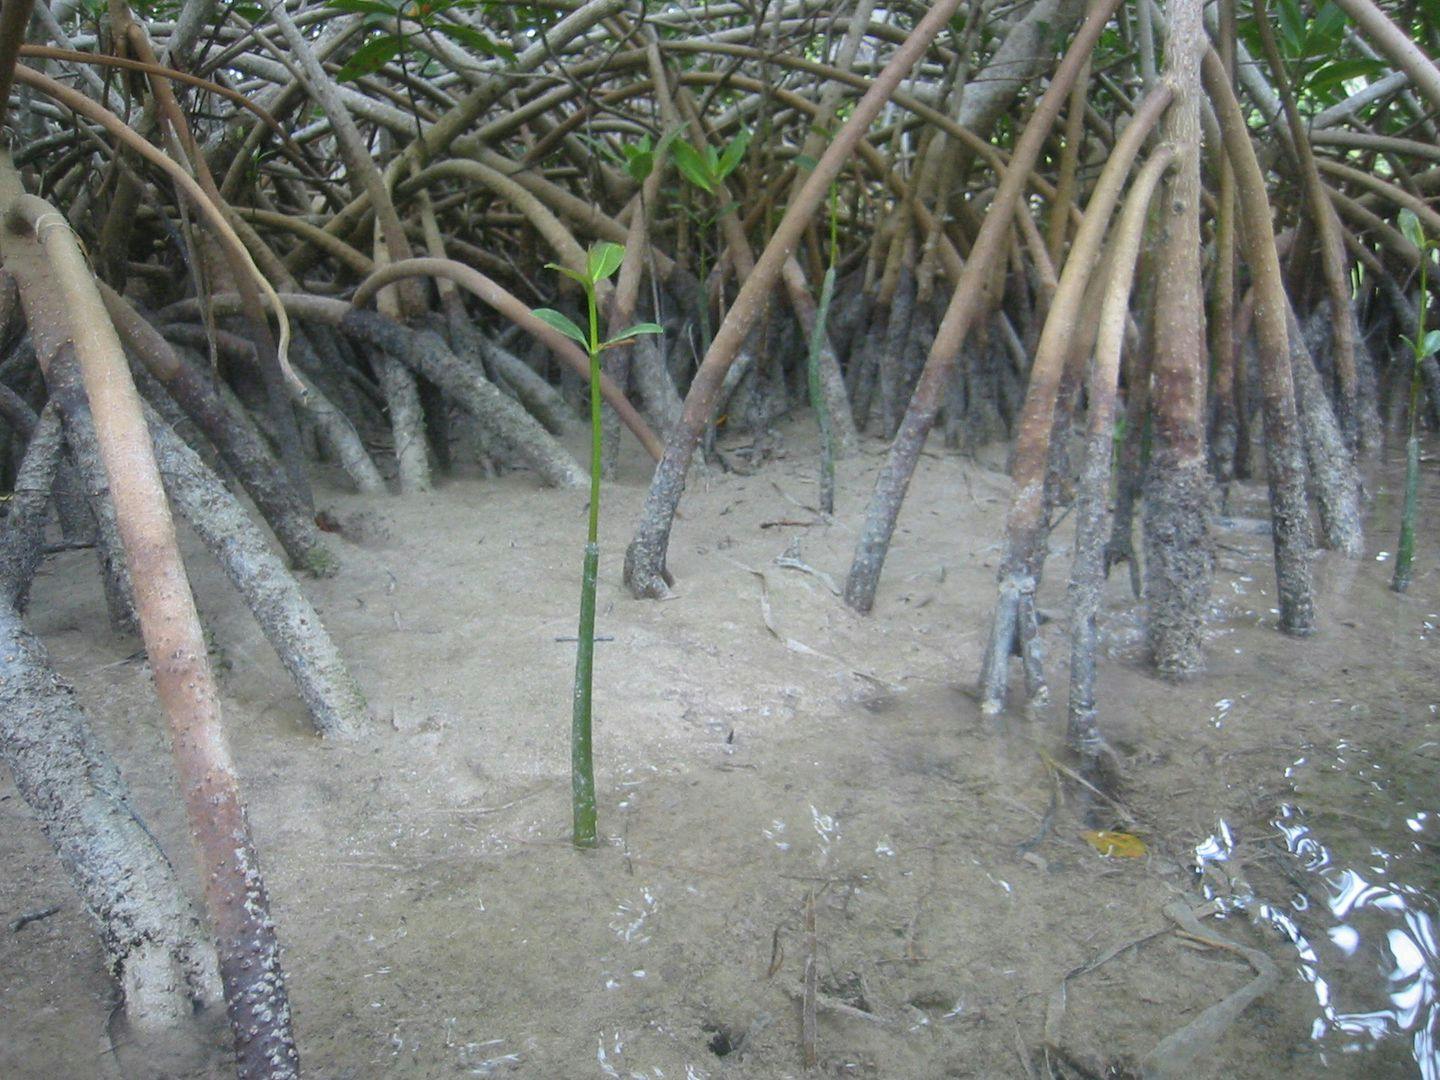 Mangroves have support trunks that makes them stable in the mud. Photo: Ronald Toppe